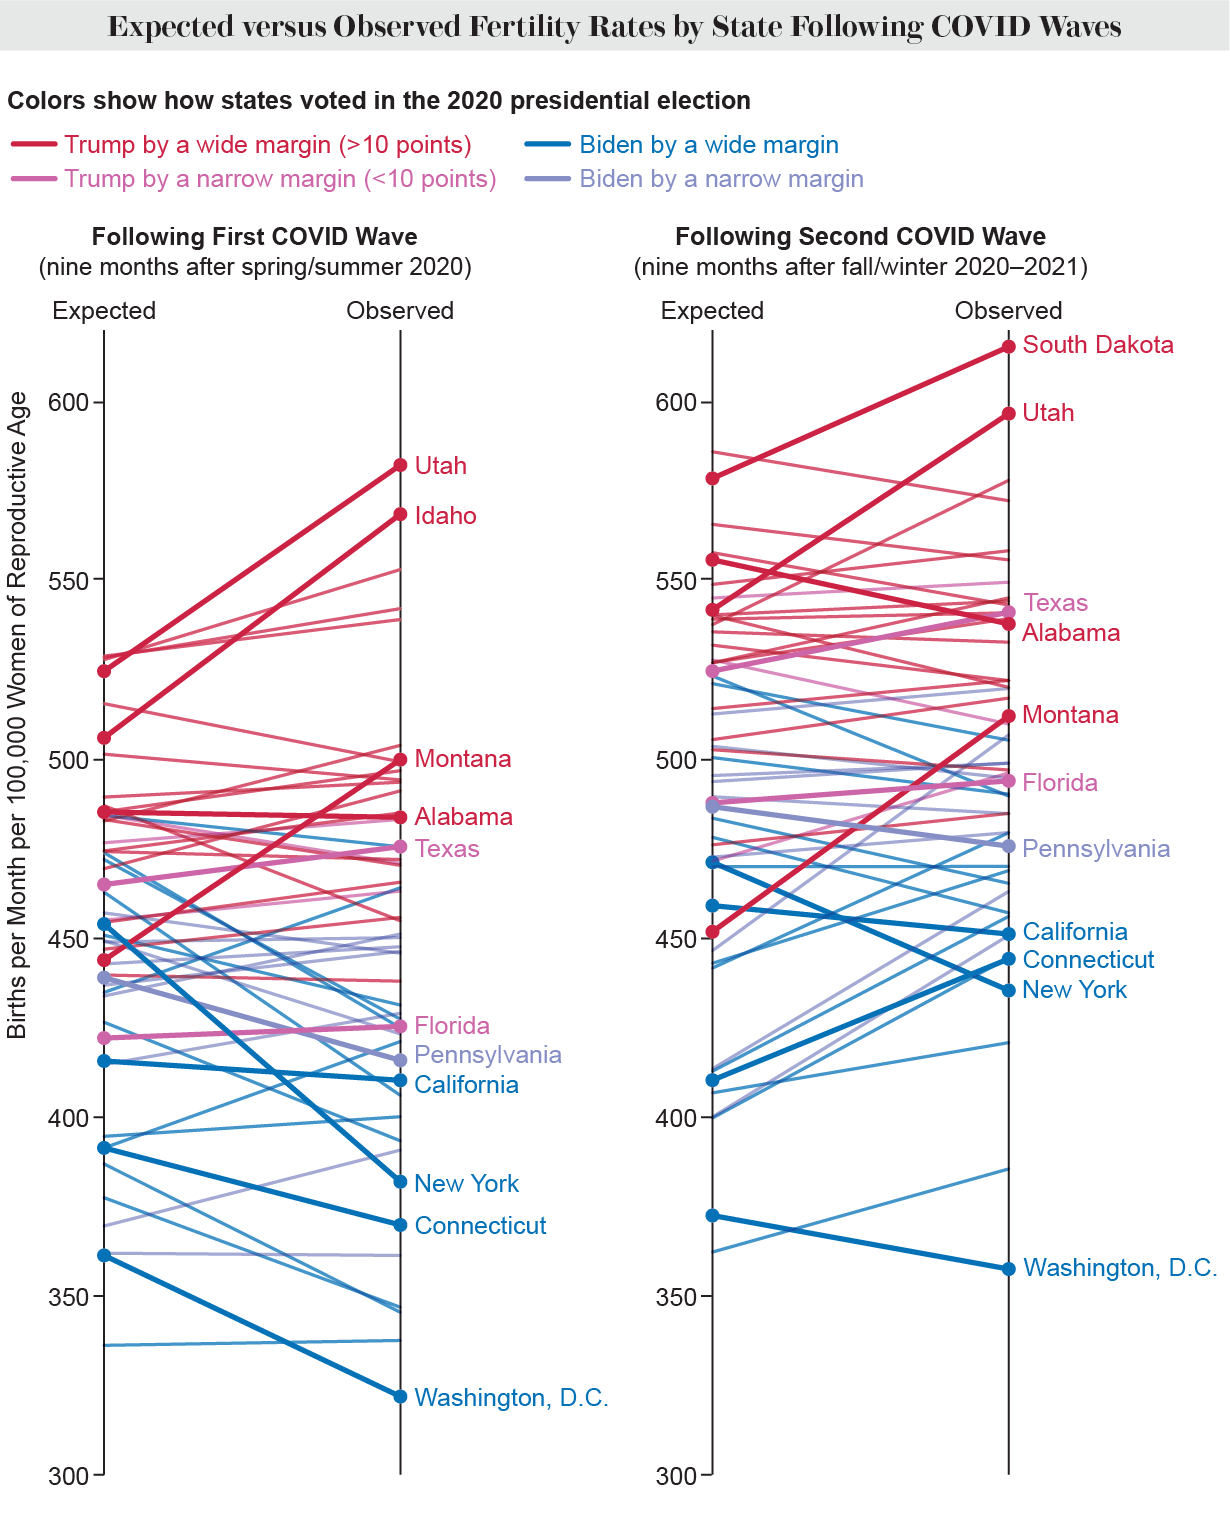 Slope charts show expected and observed fertility rates by U.S. state following first and second COVID waves. Lines are color coded to show political leanings based on how each state voted in the 2020 presidential election.